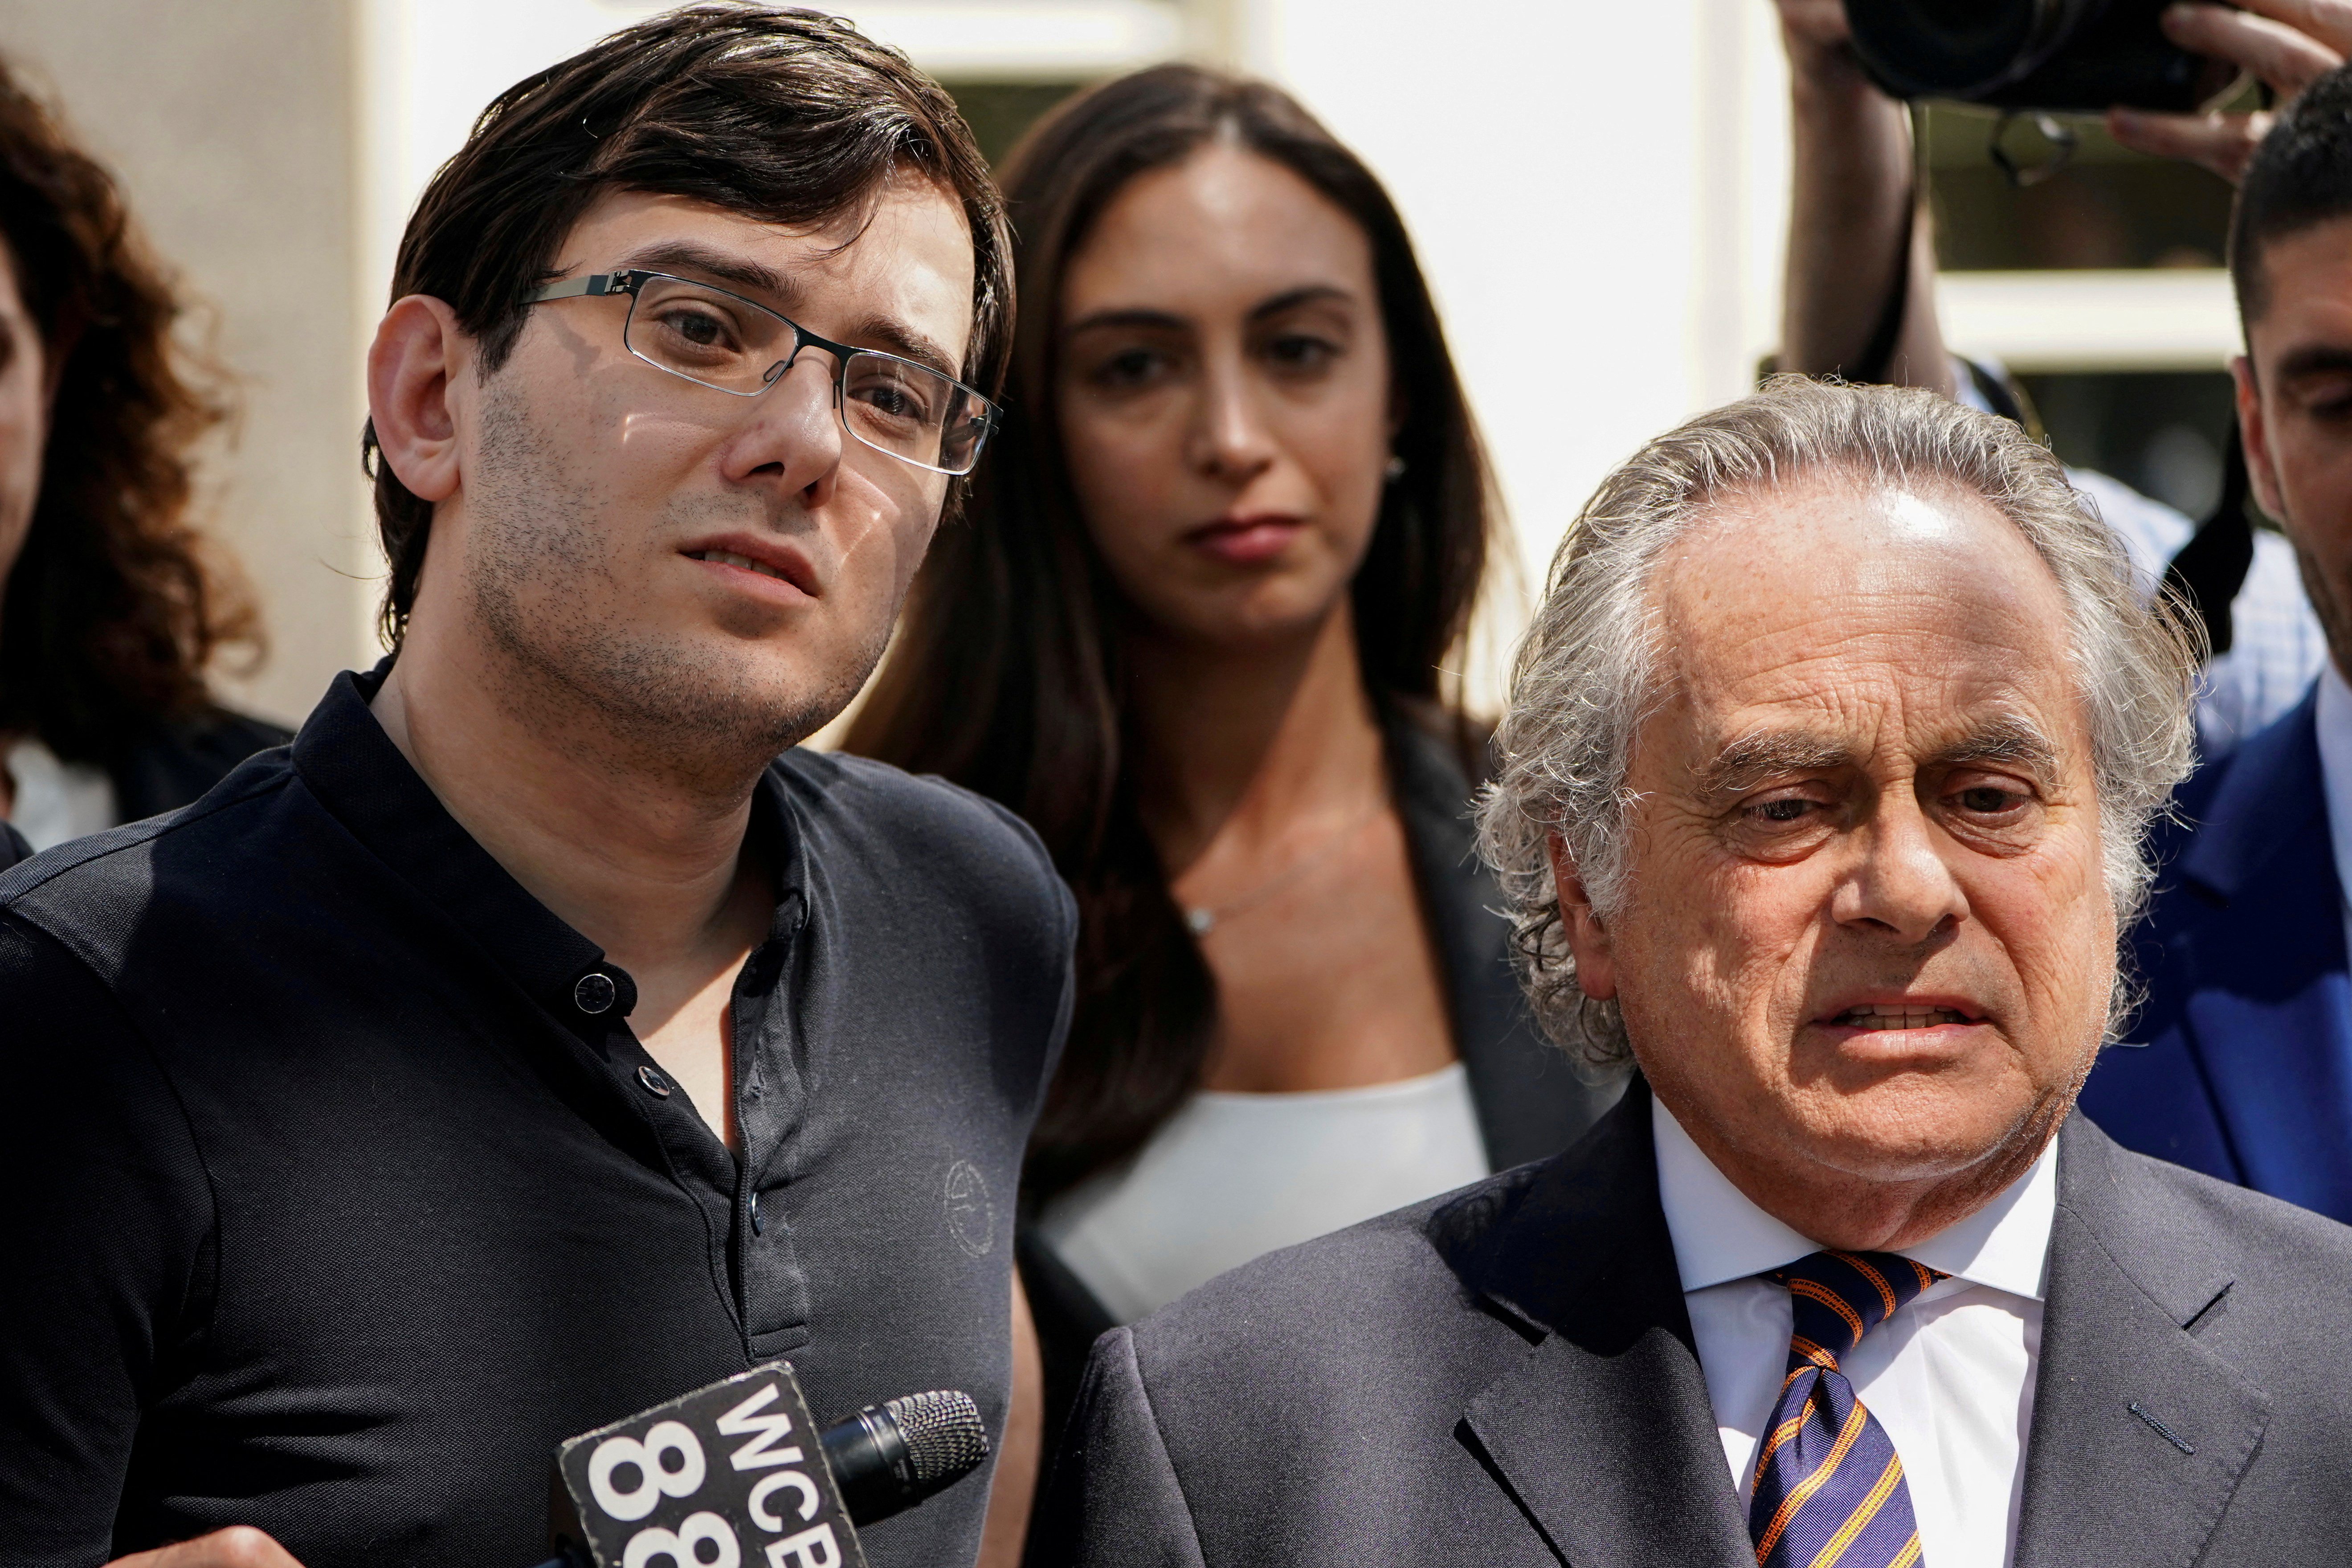 Former drug company executive Martin Shkreli stands with his attorney Benjamin Brafman after exiting U.S. District Court upon being convicted of securities fraud, in the Brooklyn borough of New York City